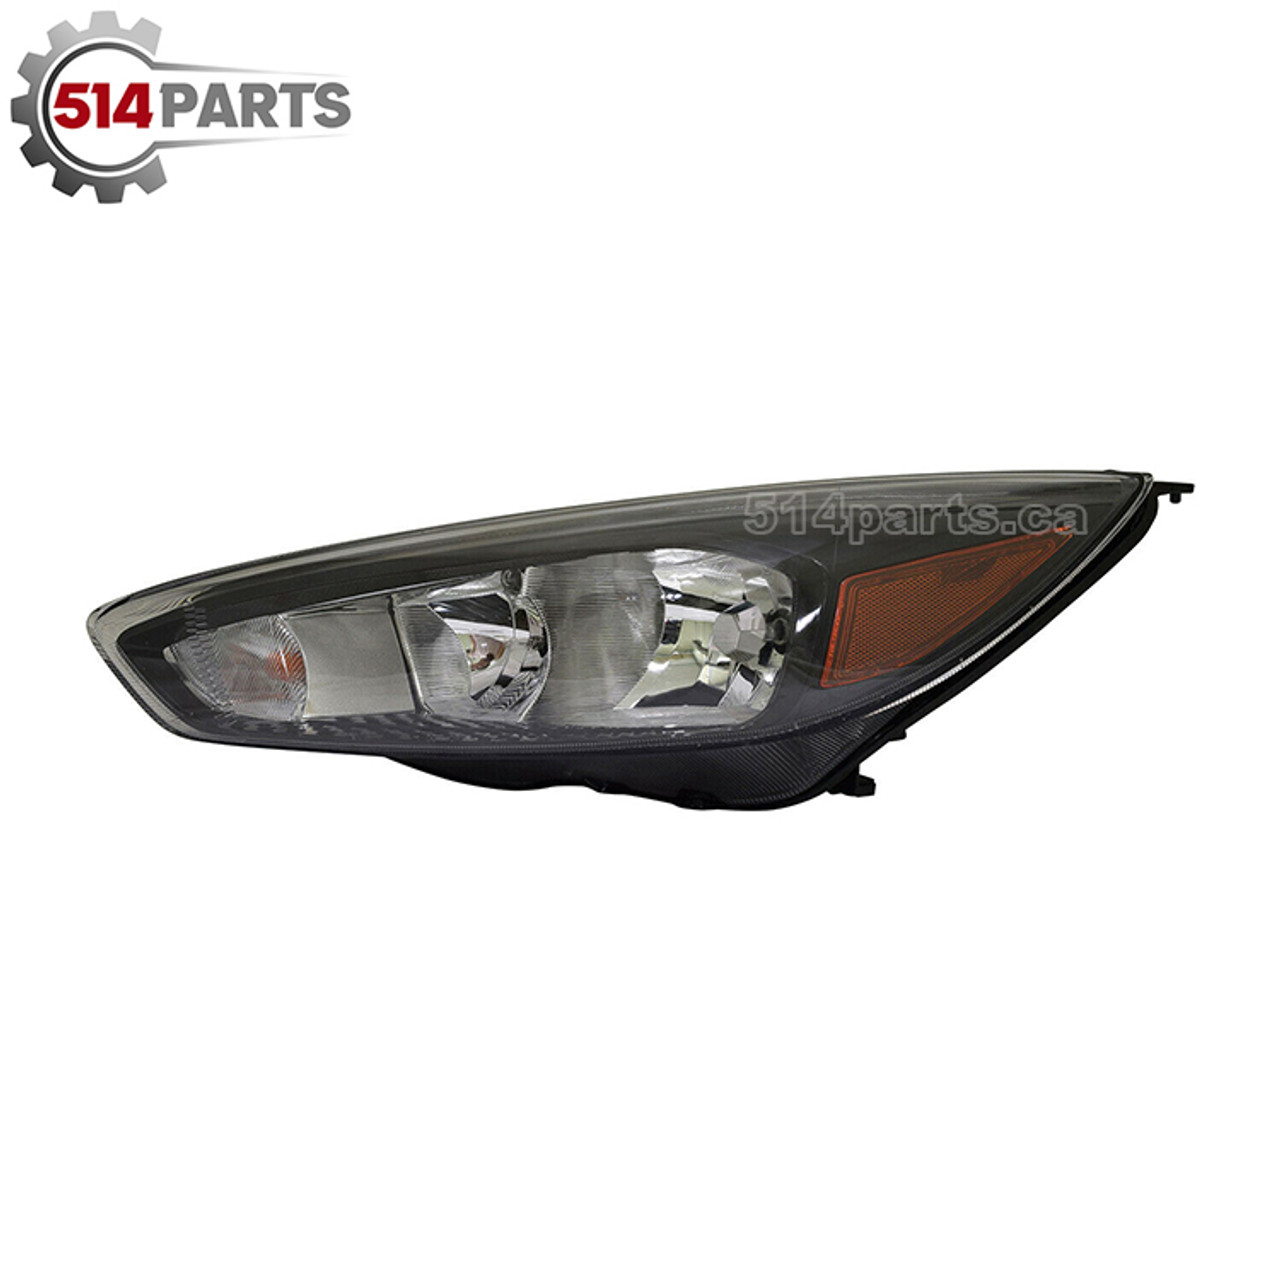 2015 - 2018 FORD FOCUS SEDAN/HATCHBACK HALOGEN HEADLIGHTS without DRL and LED with BLACK BEZEL High Quality - PHARES AVANT Haute Qualite